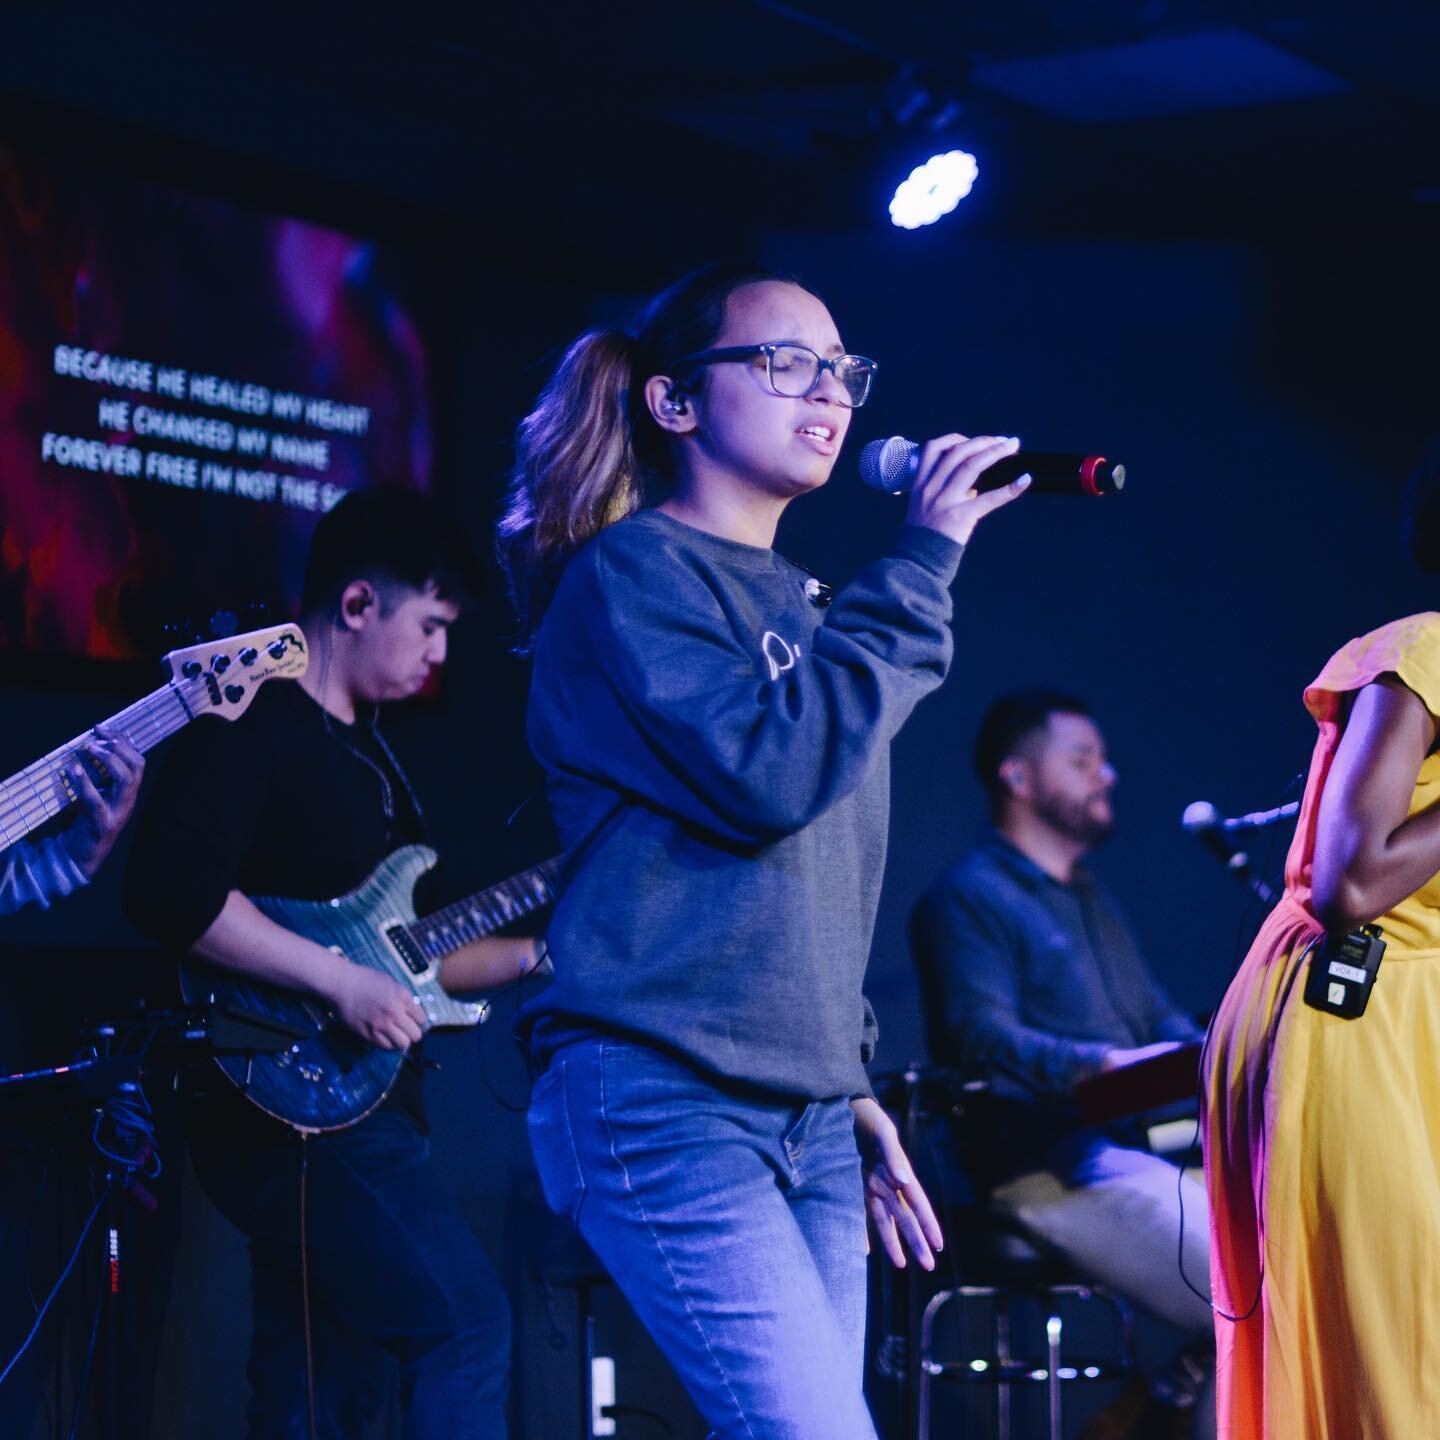 We&rsquo;re getting ready for church tomorrow and we are so excited! We hope you&rsquo;re planning on joining us for worship at 10:30AM! 

#inviteAFriend #RadiantSunday #SundayService